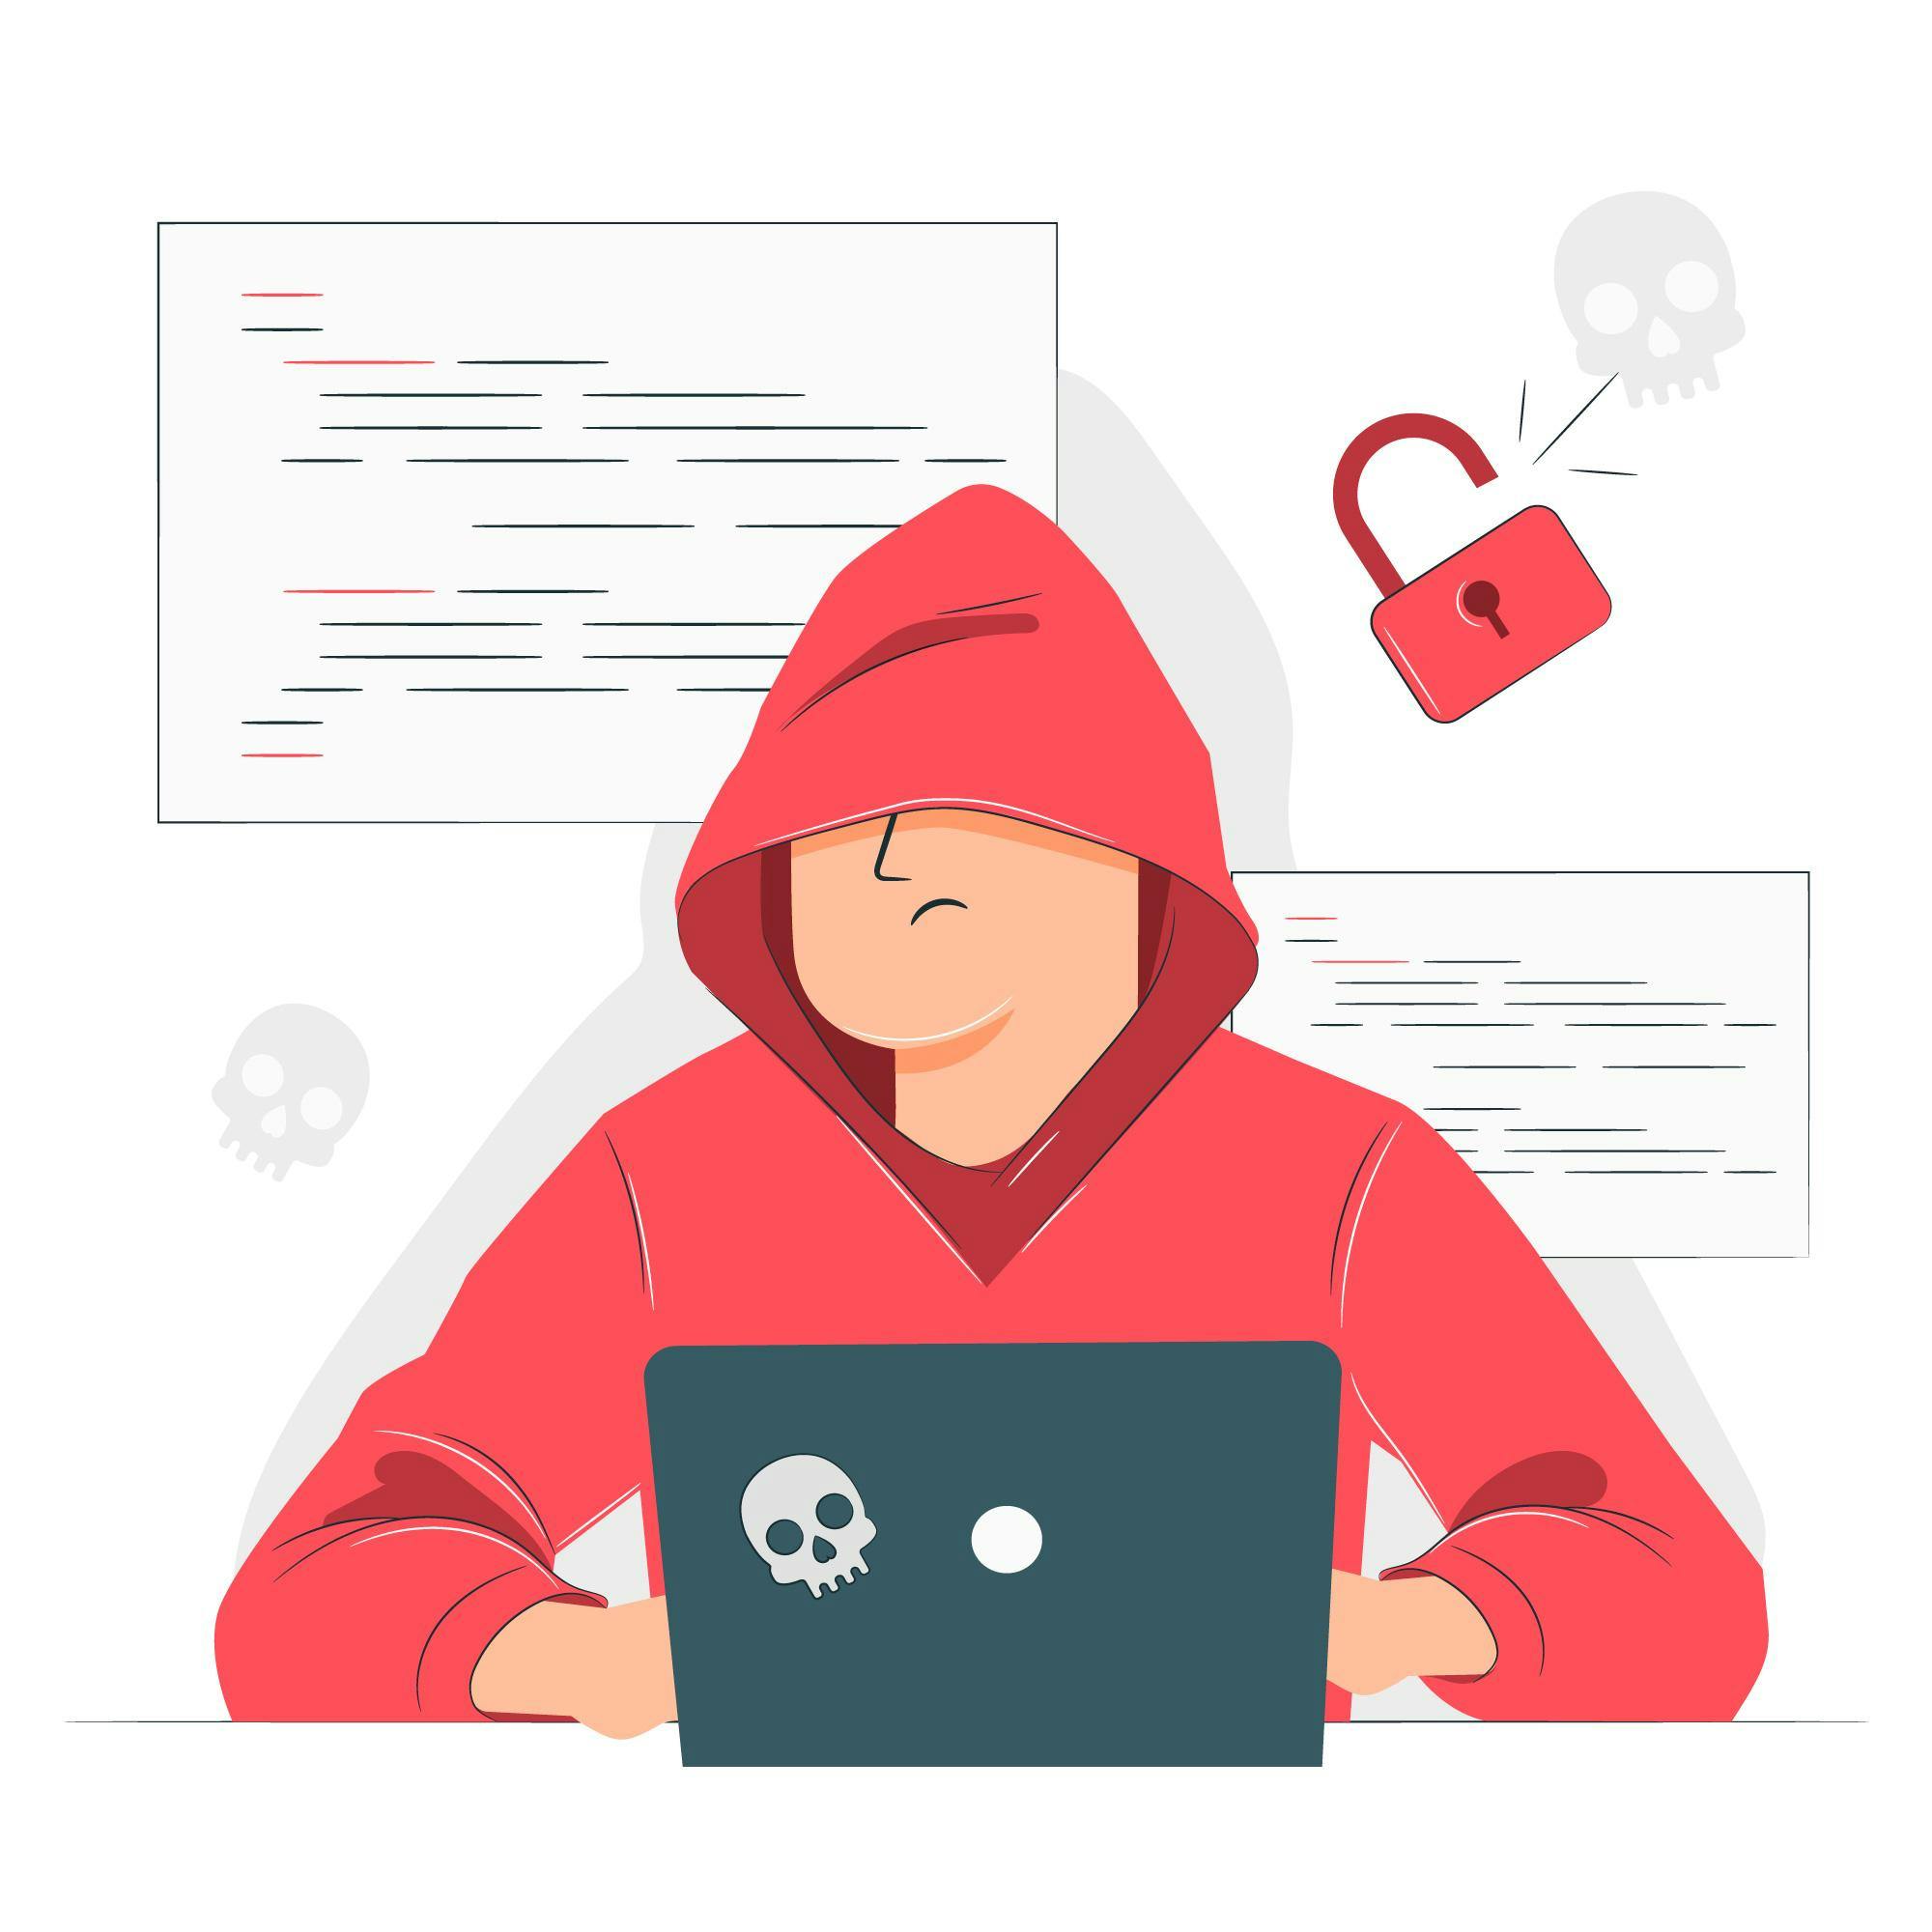 A hacker in a red hoodie hacking and bypassing the security on a system with a skull on it.